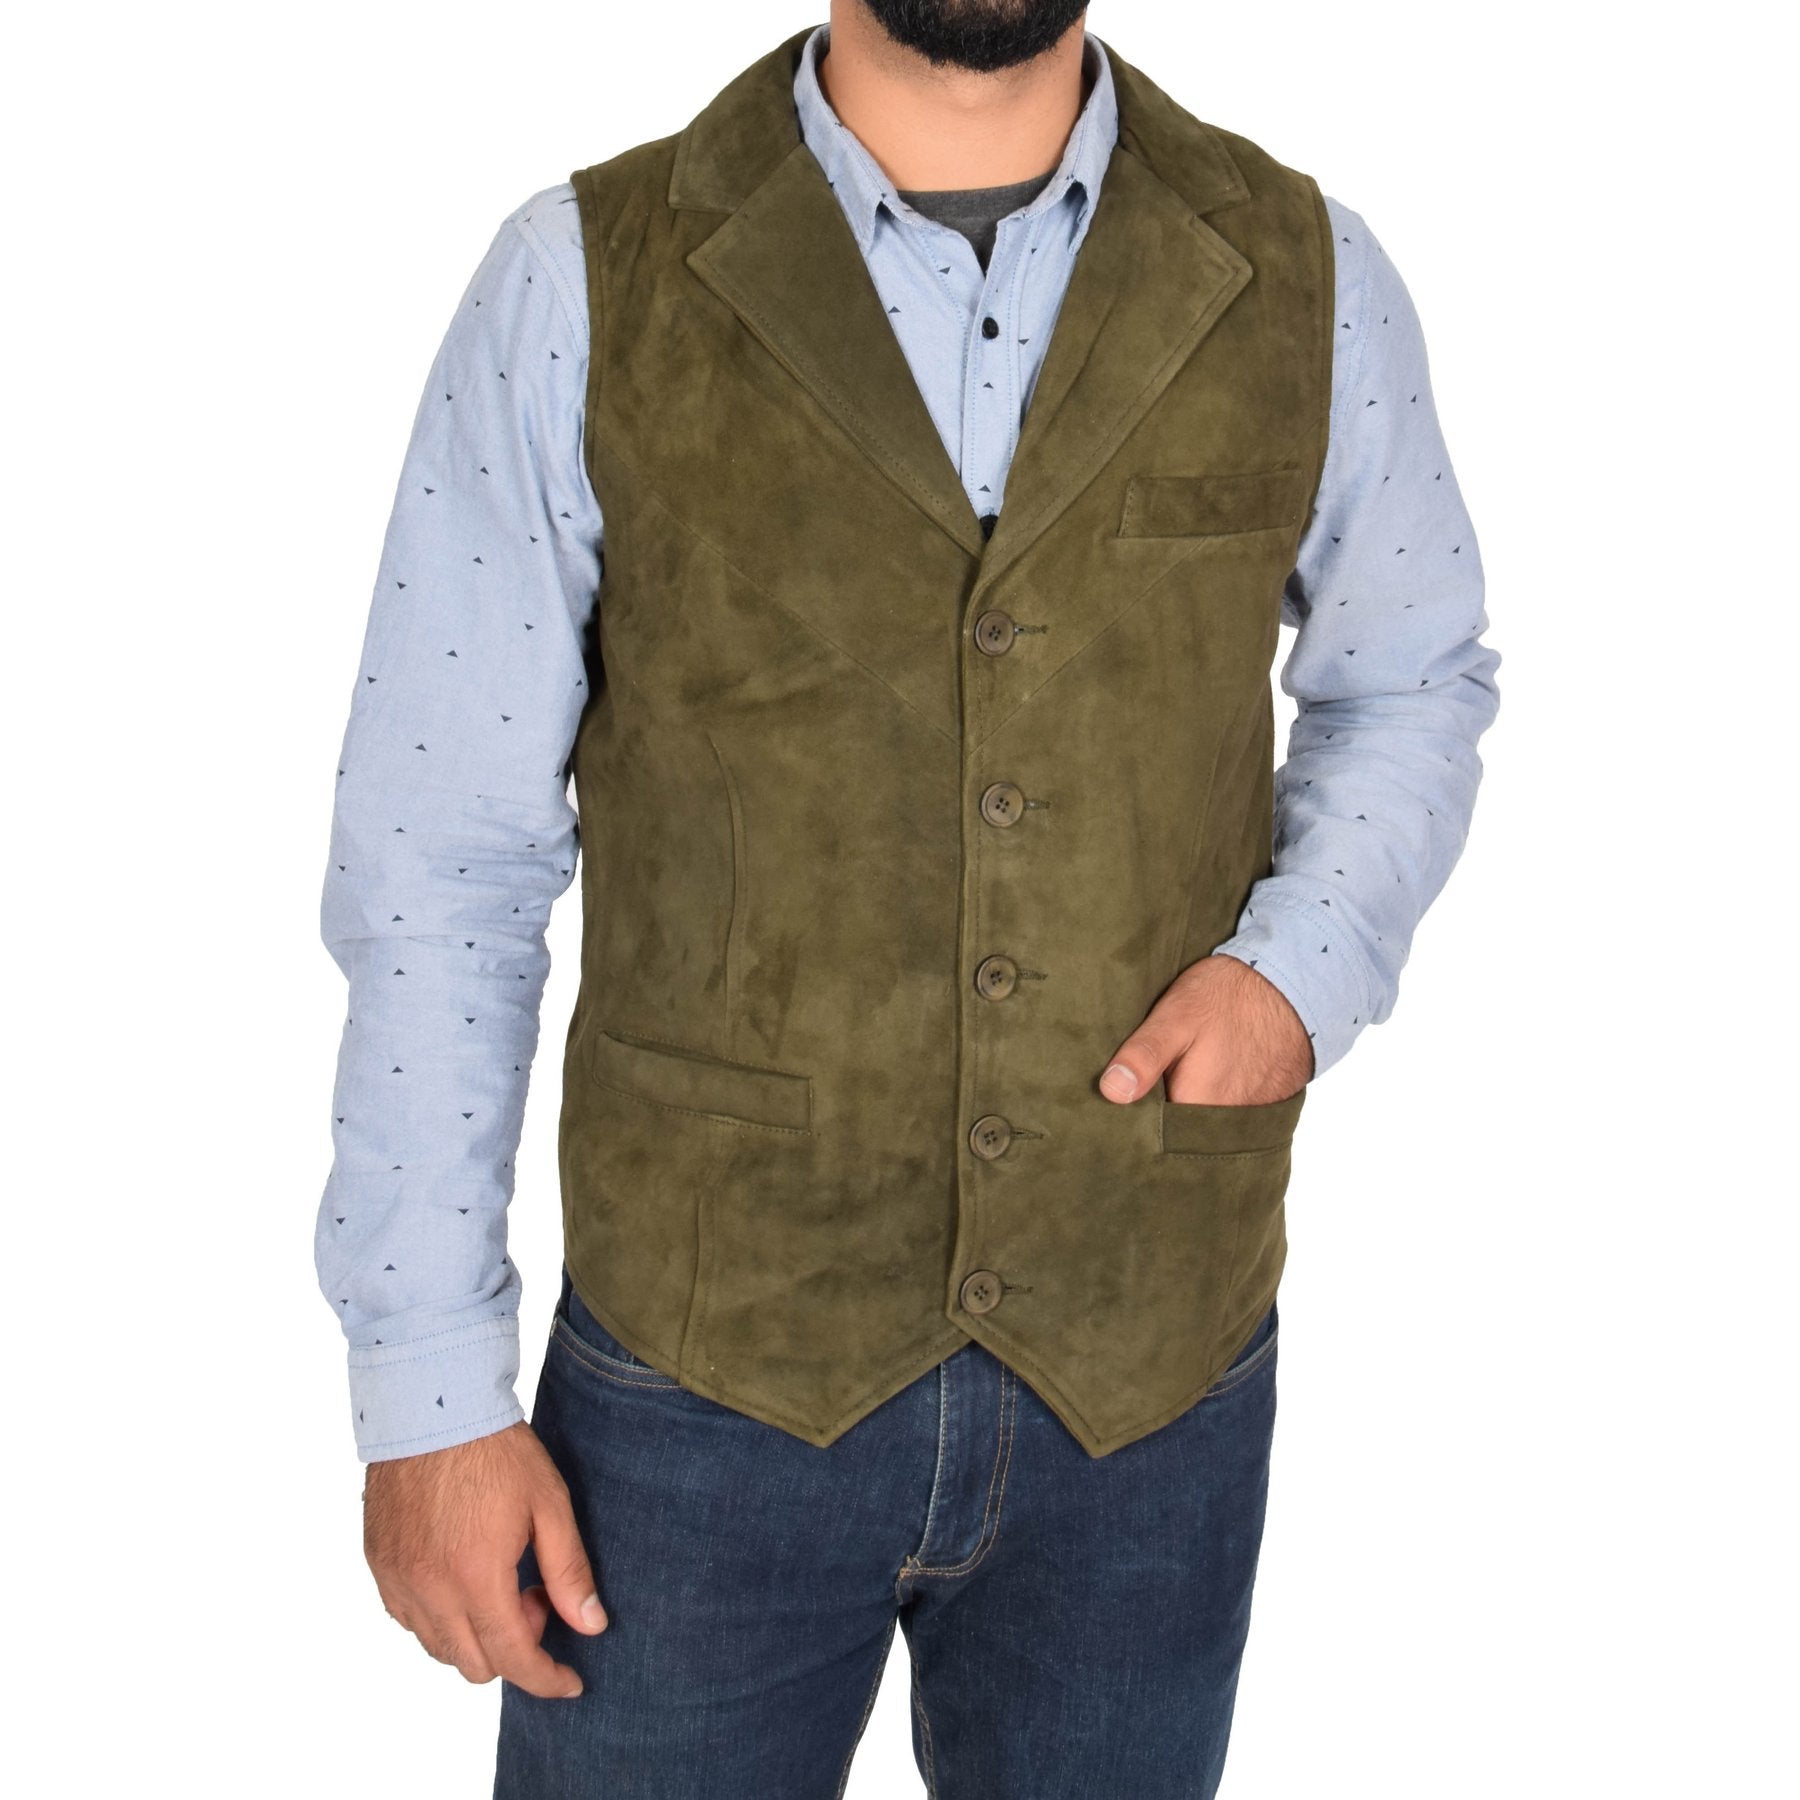 Spine Spark Men's Green Soft Suede Leather Classic Style Vest